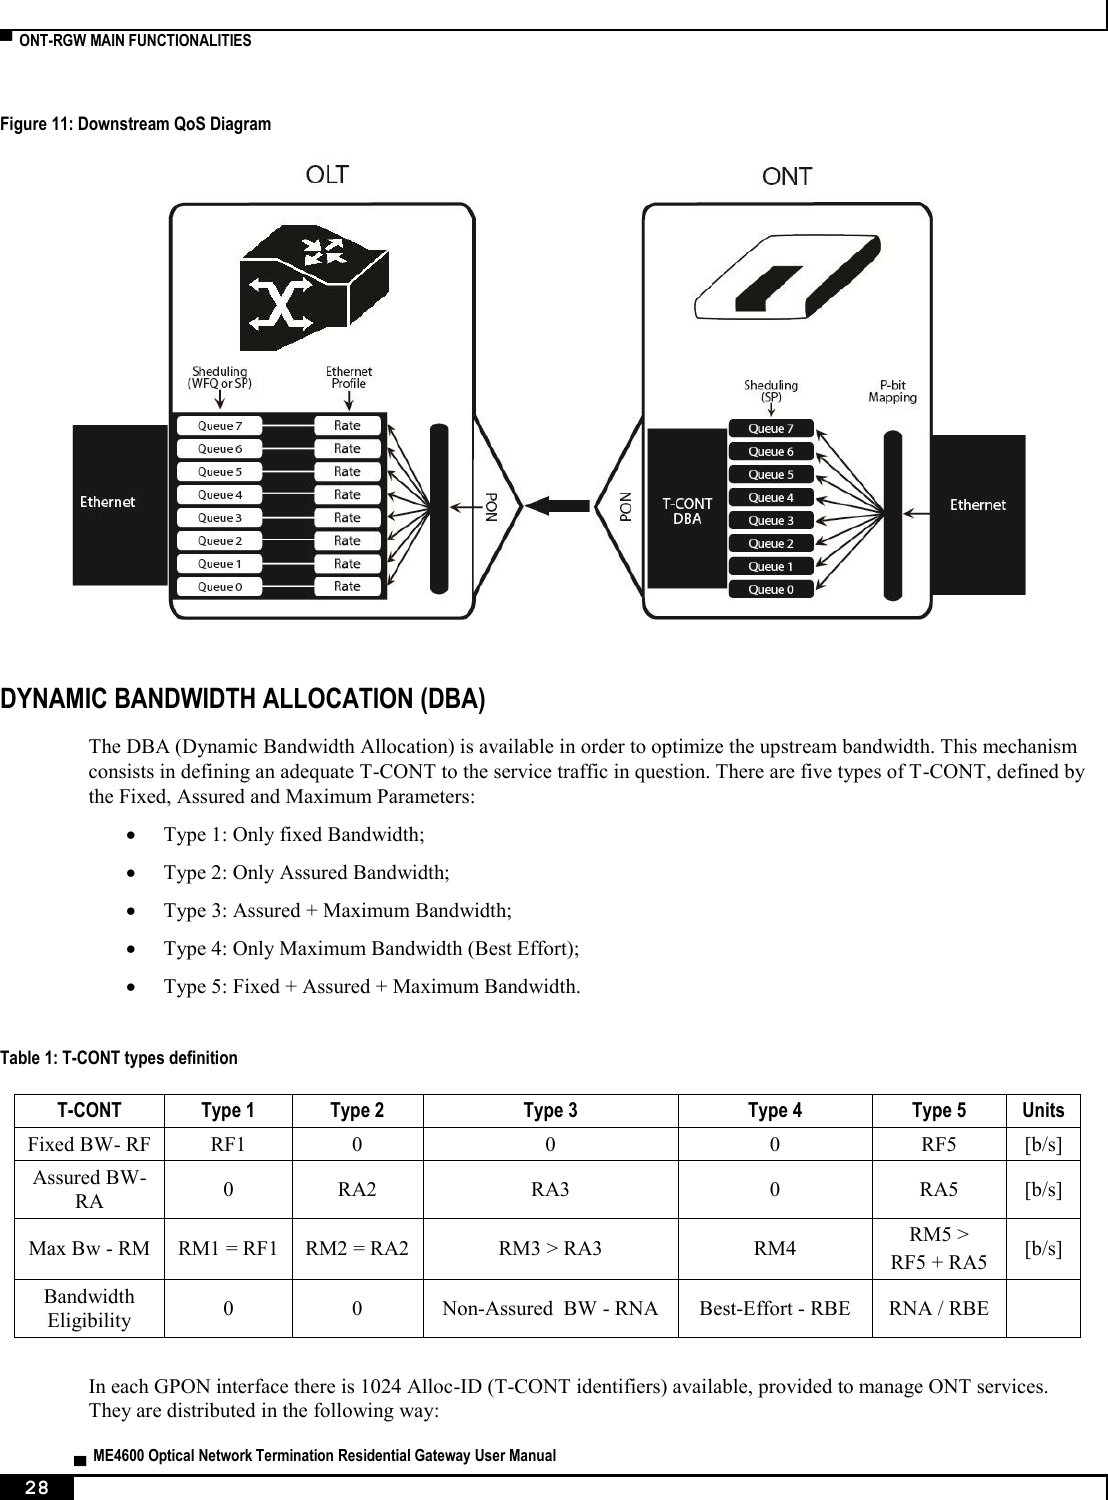  ▀  ONT-RGW MAIN FUNCTIONALITIES   ▄  ME4600 Optical Network Termination Residential Gateway User Manual 28    Figure 11: Downstream QoS Diagram   DYNAMIC BANDWIDTH ALLOCATION (DBA) The DBA (Dynamic Bandwidth Allocation) is available in order to optimize the upstream bandwidth. This mechanism consists in defining an adequate T-CONT to the service traffic in question. There are five types of T-CONT, defined by the Fixed, Assured and Maximum Parameters:  Type 1: Only fixed Bandwidth;  Type 2: Only Assured Bandwidth;  Type 3: Assured + Maximum Bandwidth;  Type 4: Only Maximum Bandwidth (Best Effort);  Type 5: Fixed + Assured + Maximum Bandwidth.  Table 1: T-CONT types definition T-CONT Type 1 Type 2 Type 3 Type 4 Type 5 Units Fixed BW- RF RF1 0 0 0 RF5 [b/s] Assured BW- RA 0 RA2 RA3 0 RA5 [b/s] Max Bw - RM RM1 = RF1 RM2 = RA2 RM3 &gt; RA3 RM4 RM5 &gt; RF5 + RA5 [b/s] Bandwidth Eligibility 0 0 Non-Assured  BW - RNA Best-Effort - RBE RNA / RBE   In each GPON interface there is 1024 Alloc-ID (T-CONT identifiers) available, provided to manage ONT services. They are distributed in the following way: 